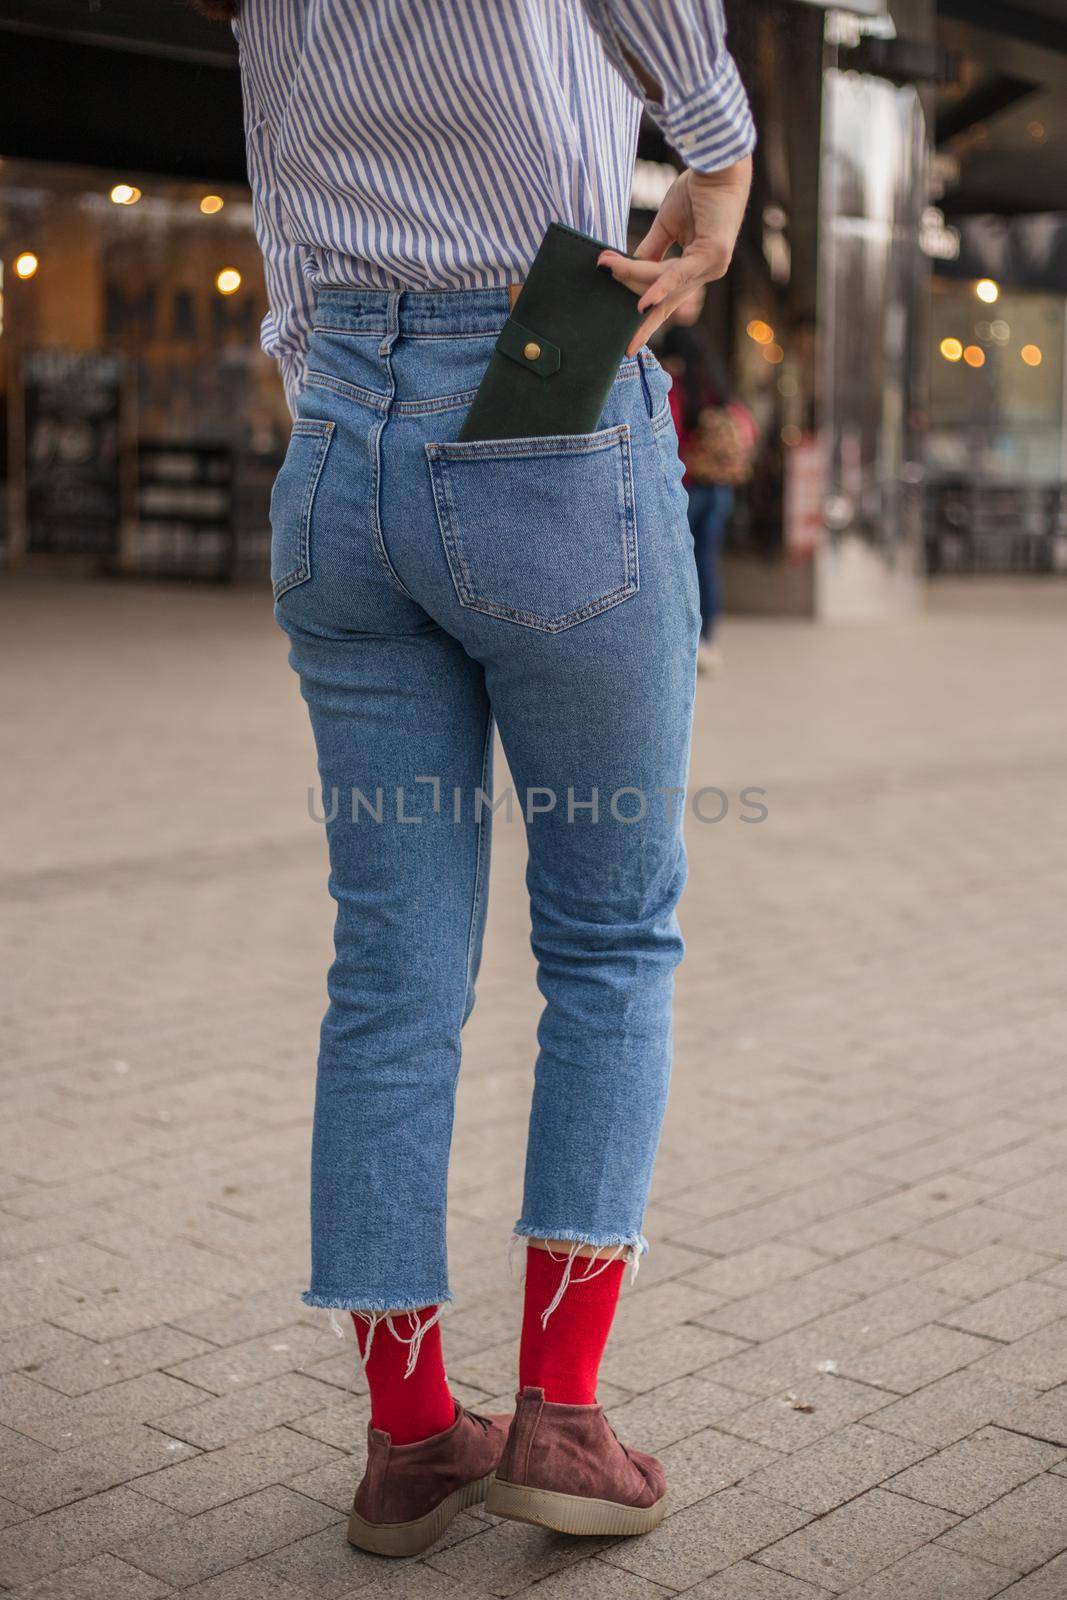 Confident woman posing in save keeping your wallet in the back pocket in pants